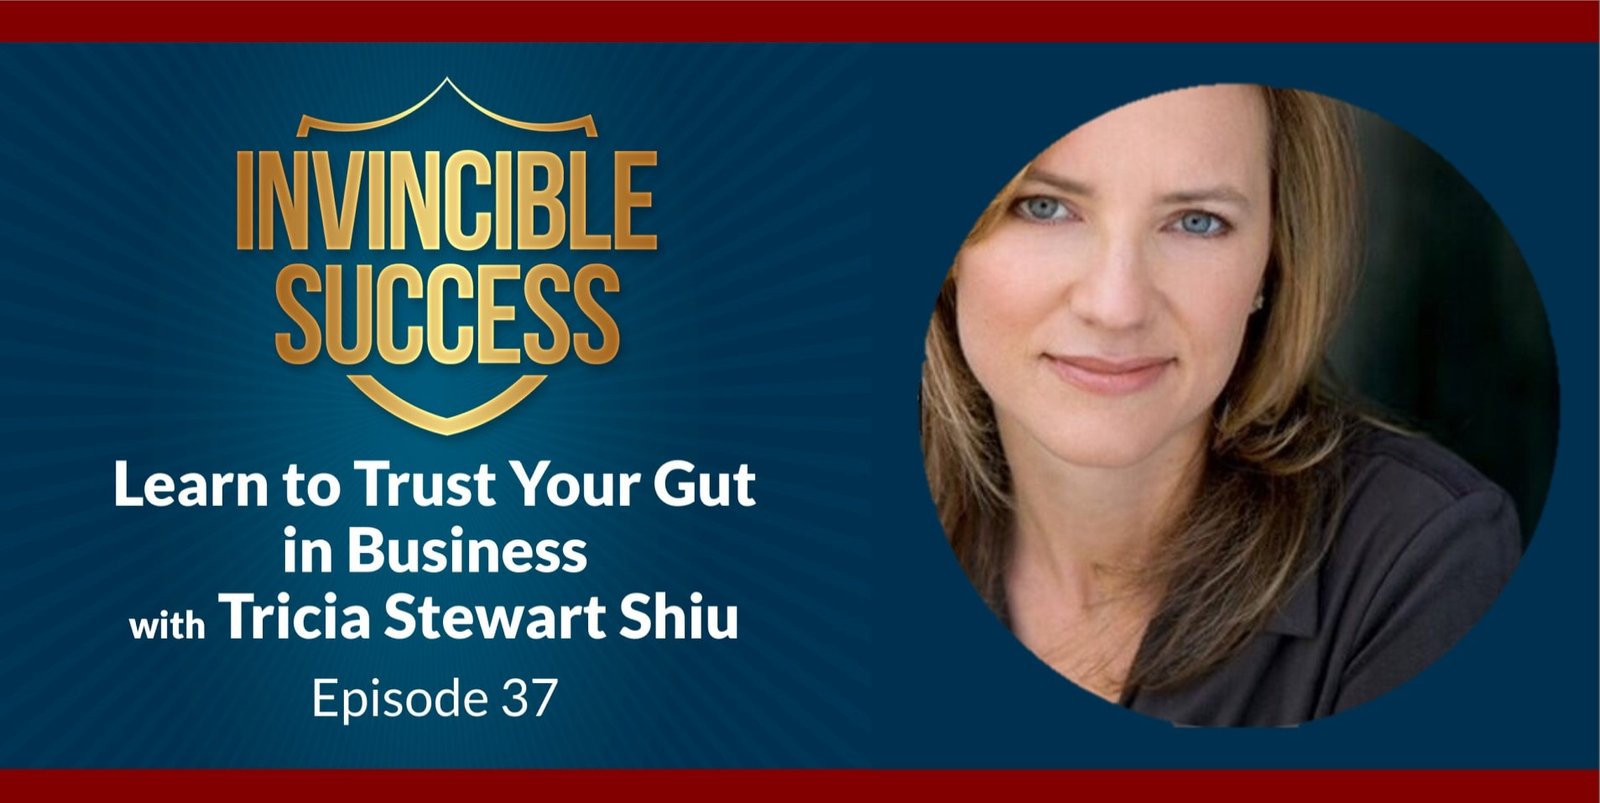 Learn to Trust Your Gut in Business with Tricia Stewart Shiu